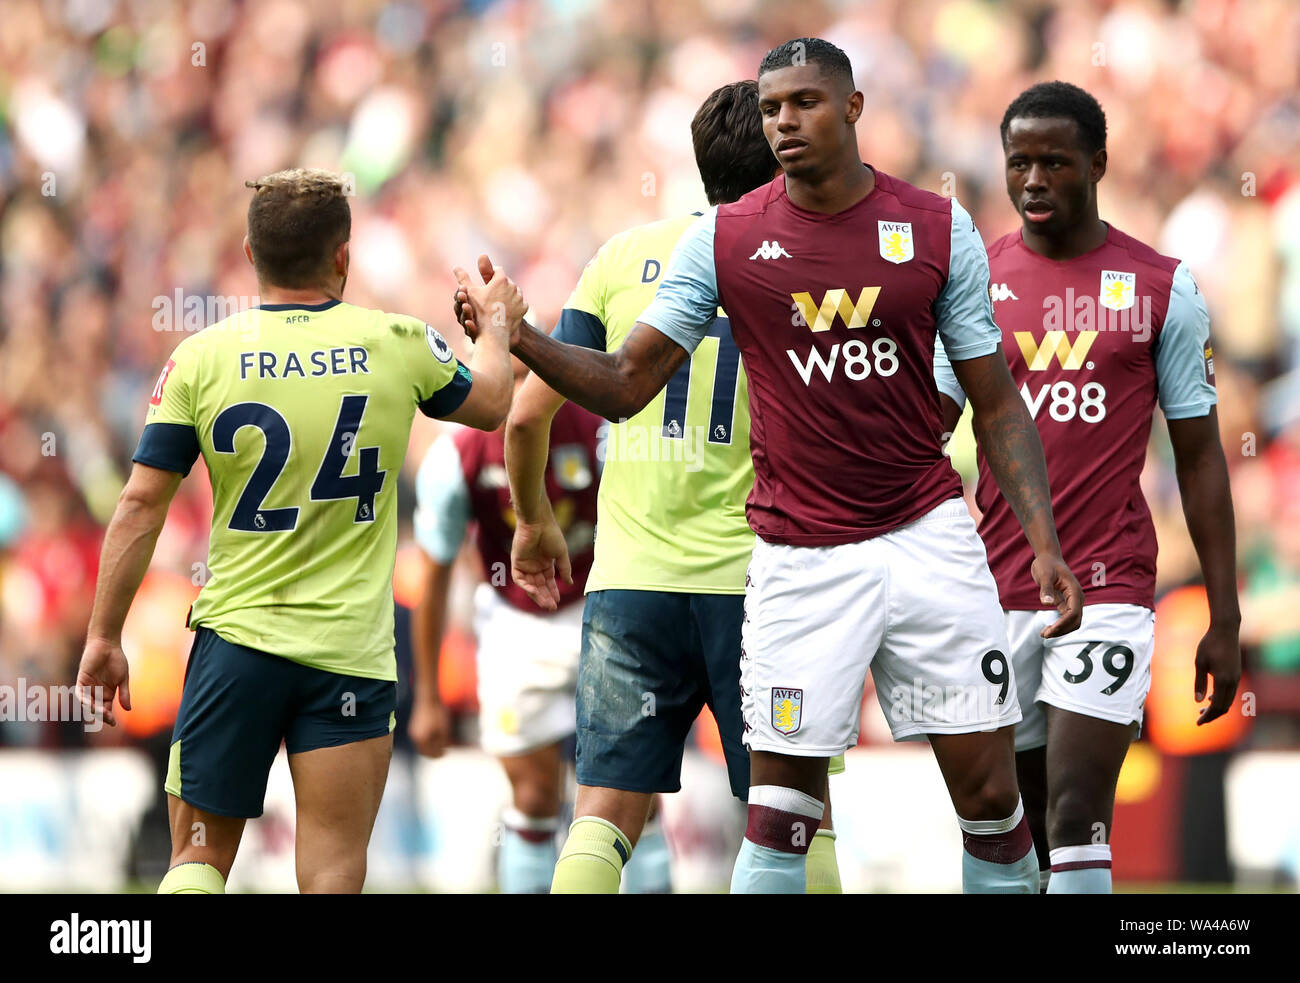 aston-villas-wesley-right-and-bournemouths-ryan-fraser-shake-hands-after-the-final-whistle-during-the-premier-league-match-at-villa-park-birmingham-WA4A6W.jpg